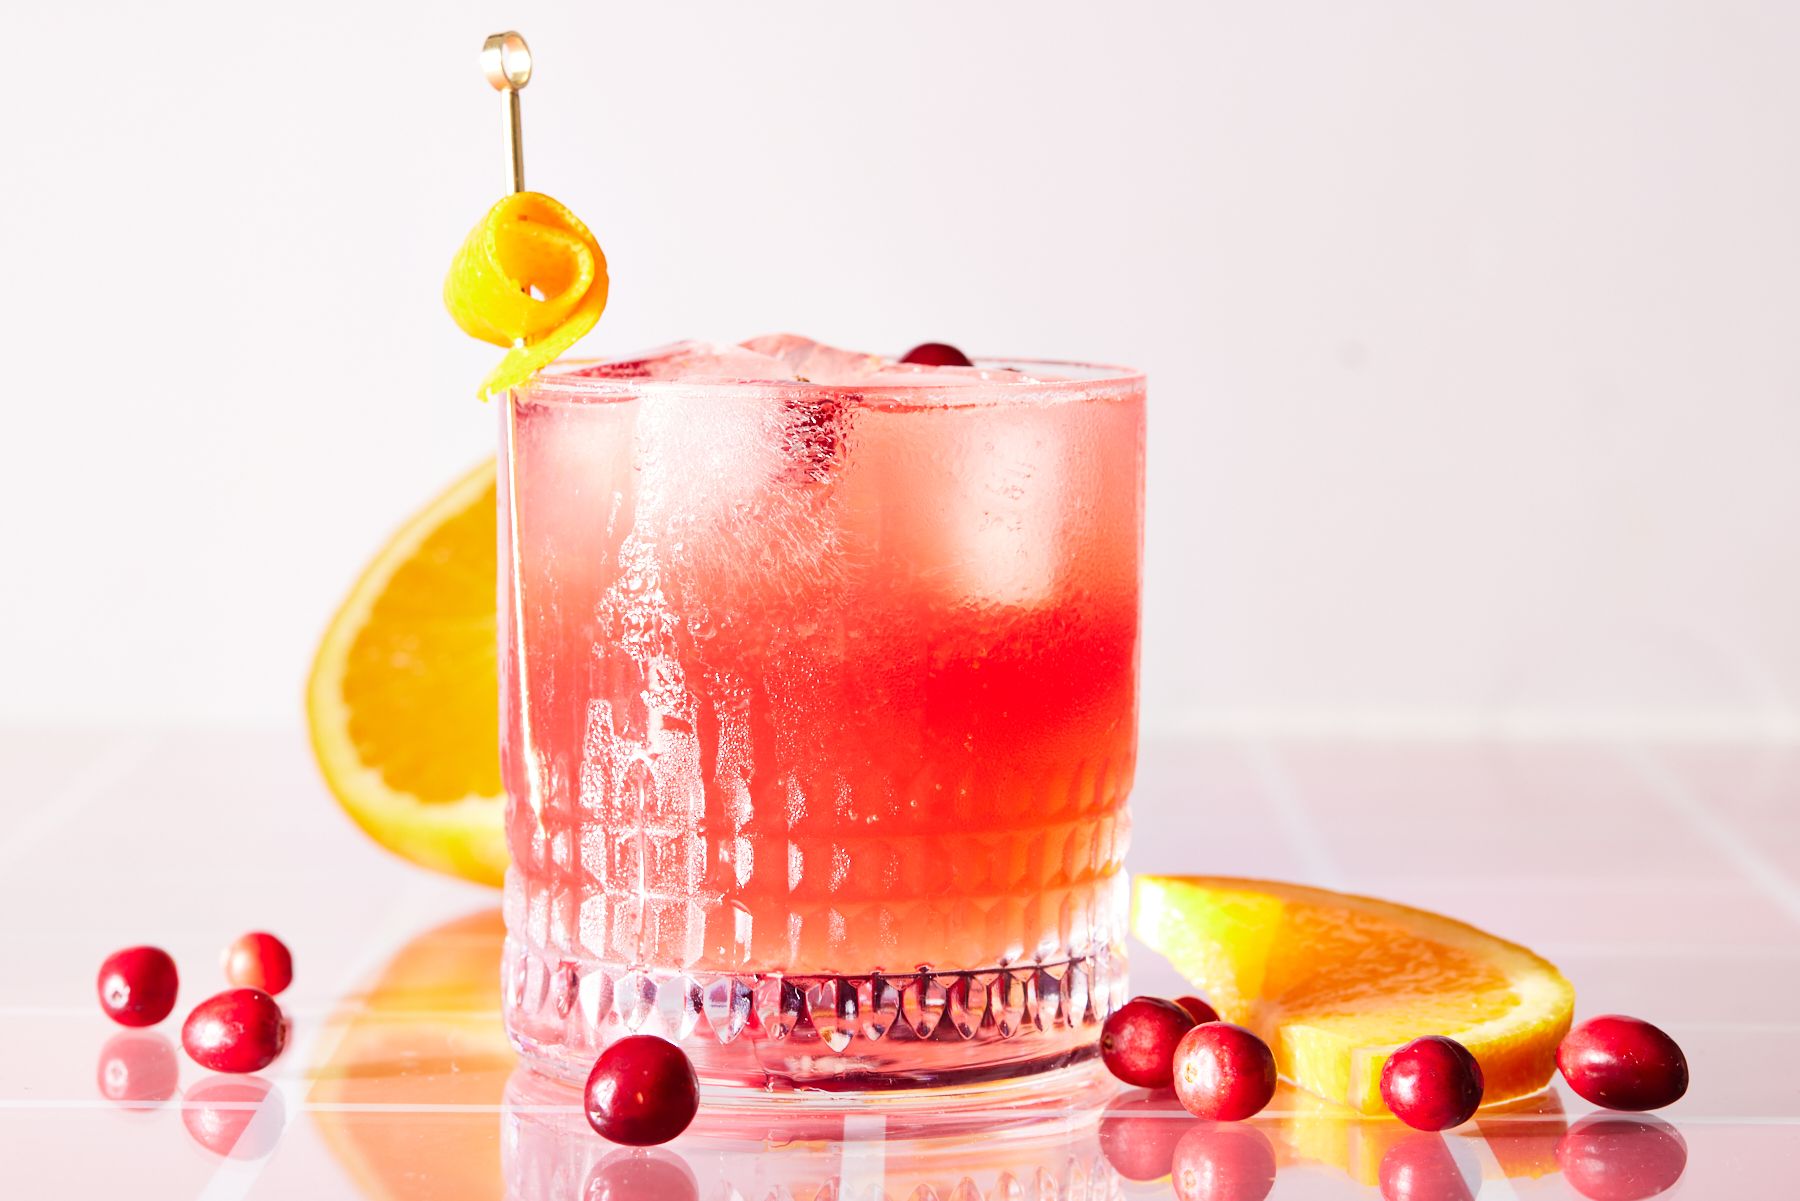 45 Best Winter Cocktails Recipes - Easy Ideas for Winter Cocktails